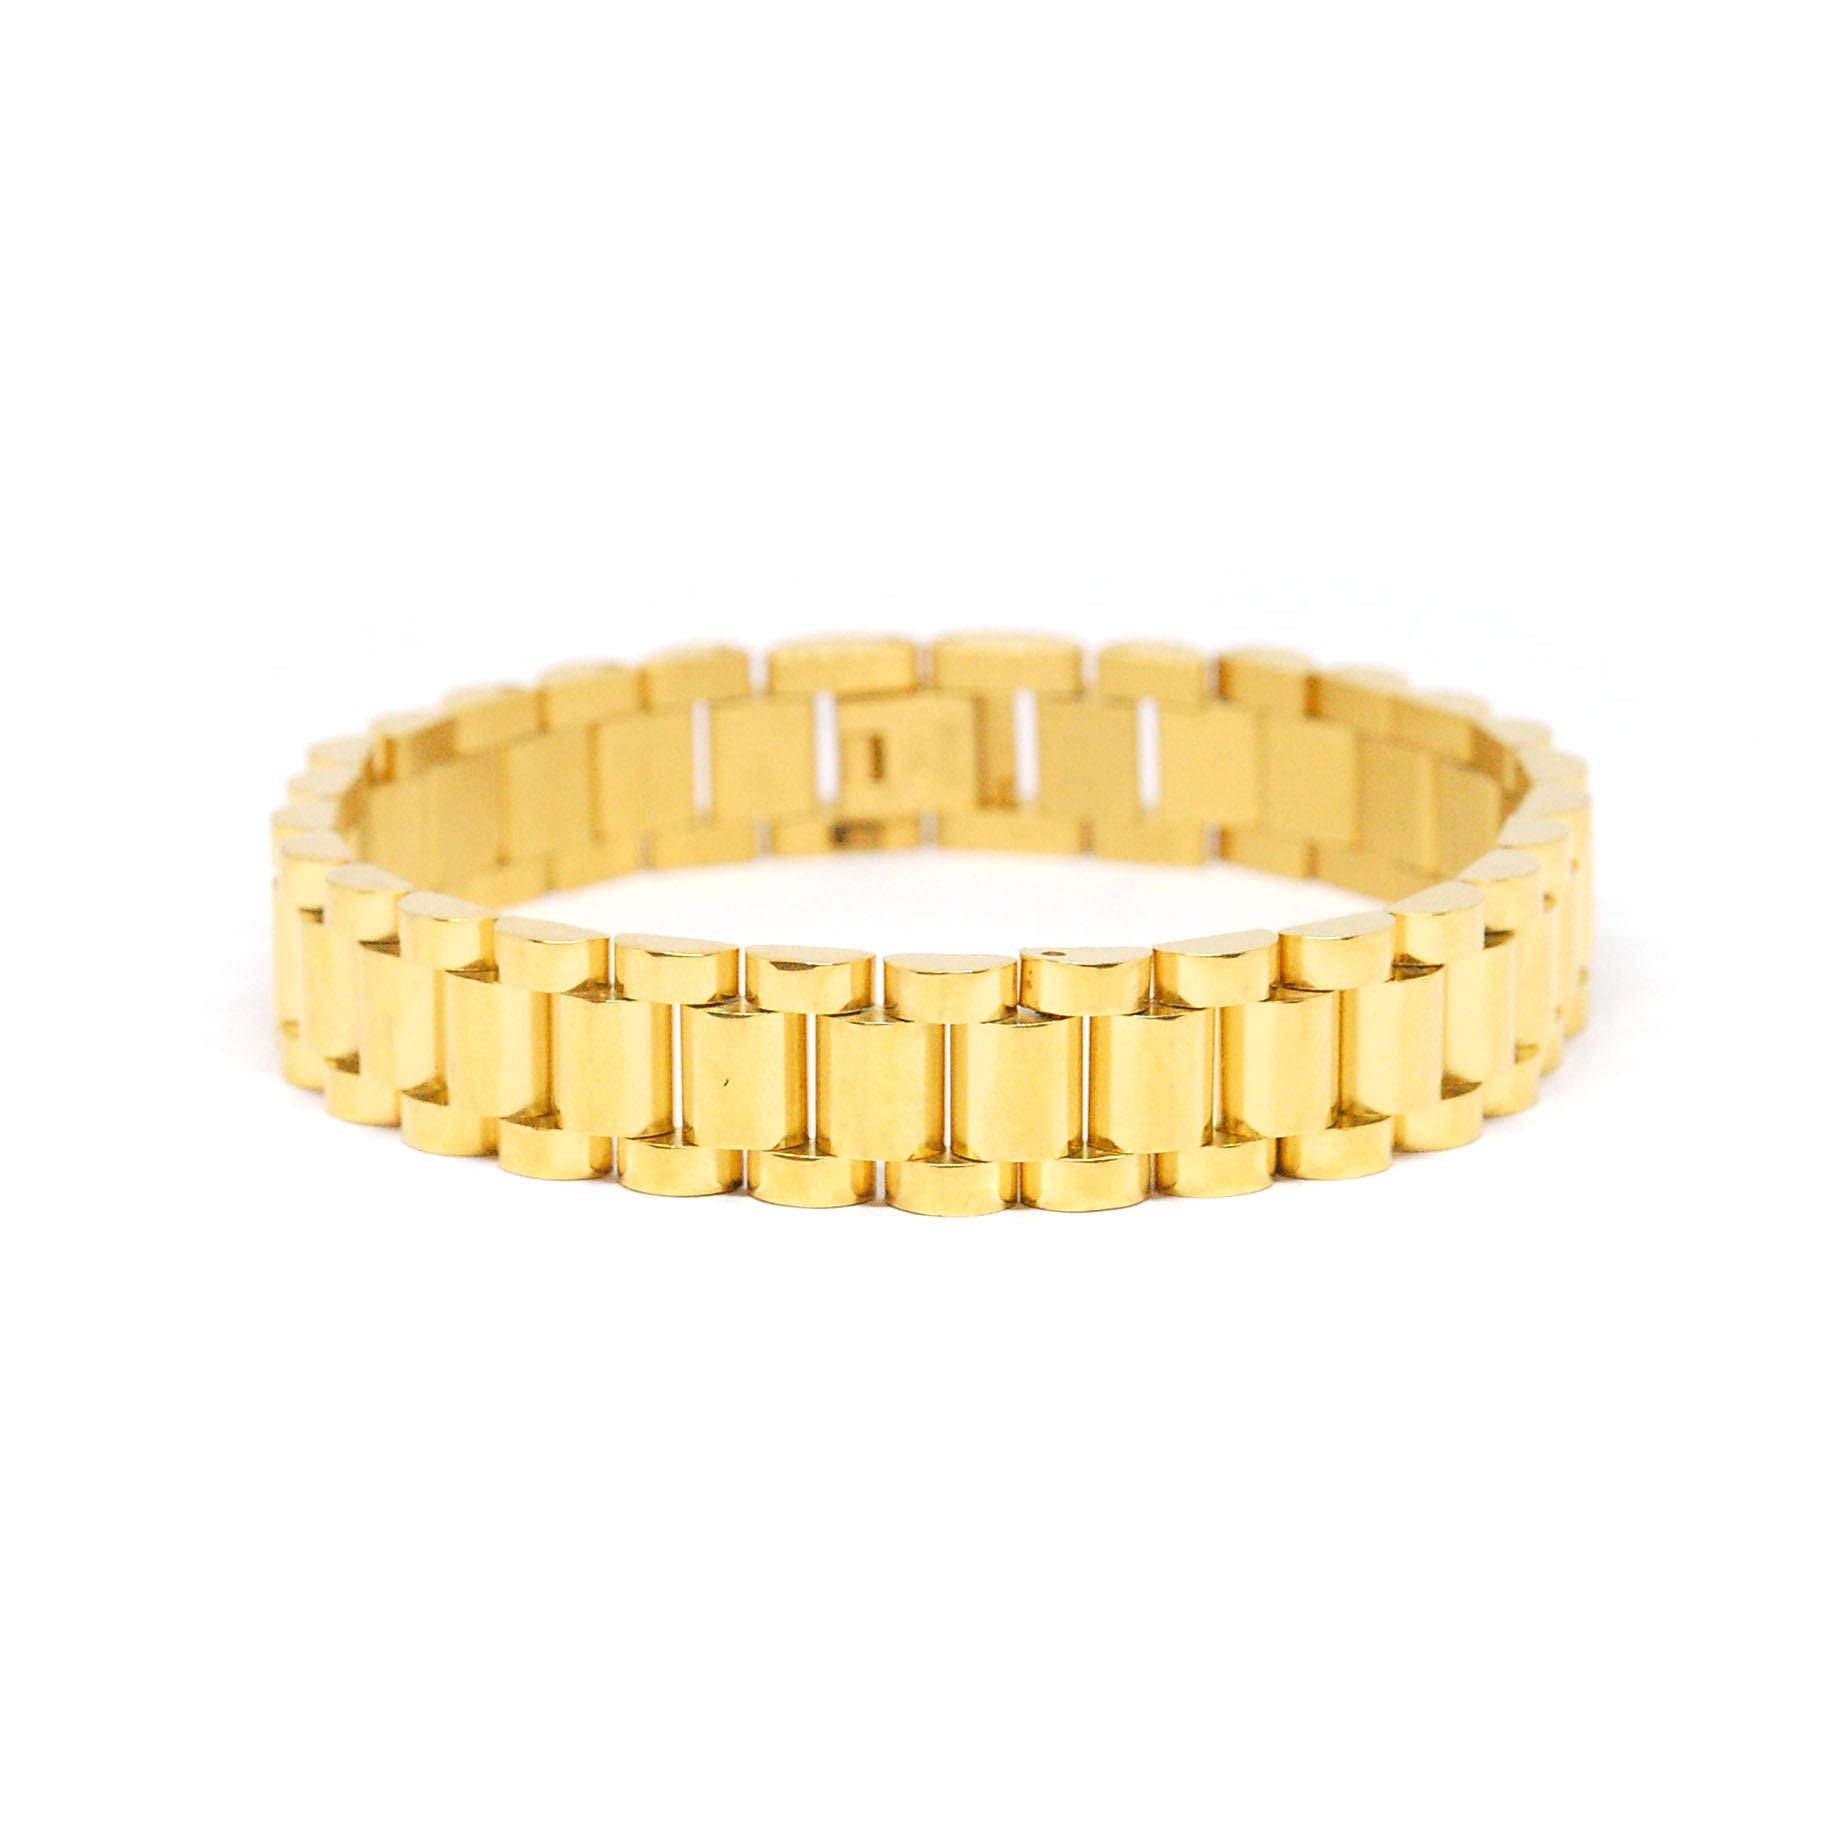 ESBL 7745: All Gold-Plated Rolex Male Bracelet (12mm)